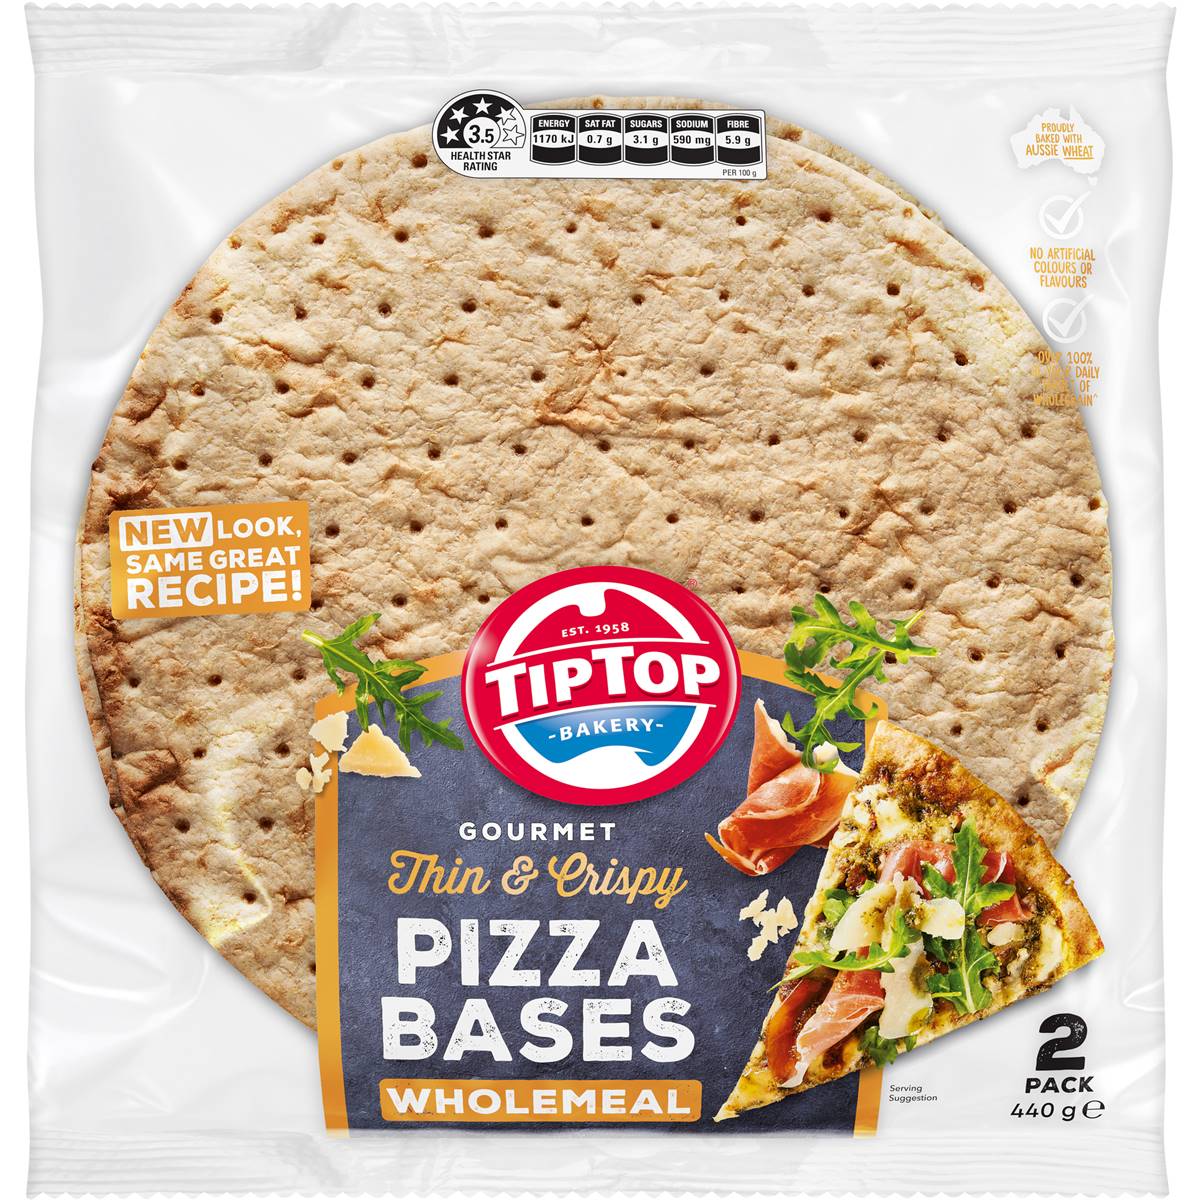 Calories in Tip Top Pizza Bases Wholemeal 12 Inch